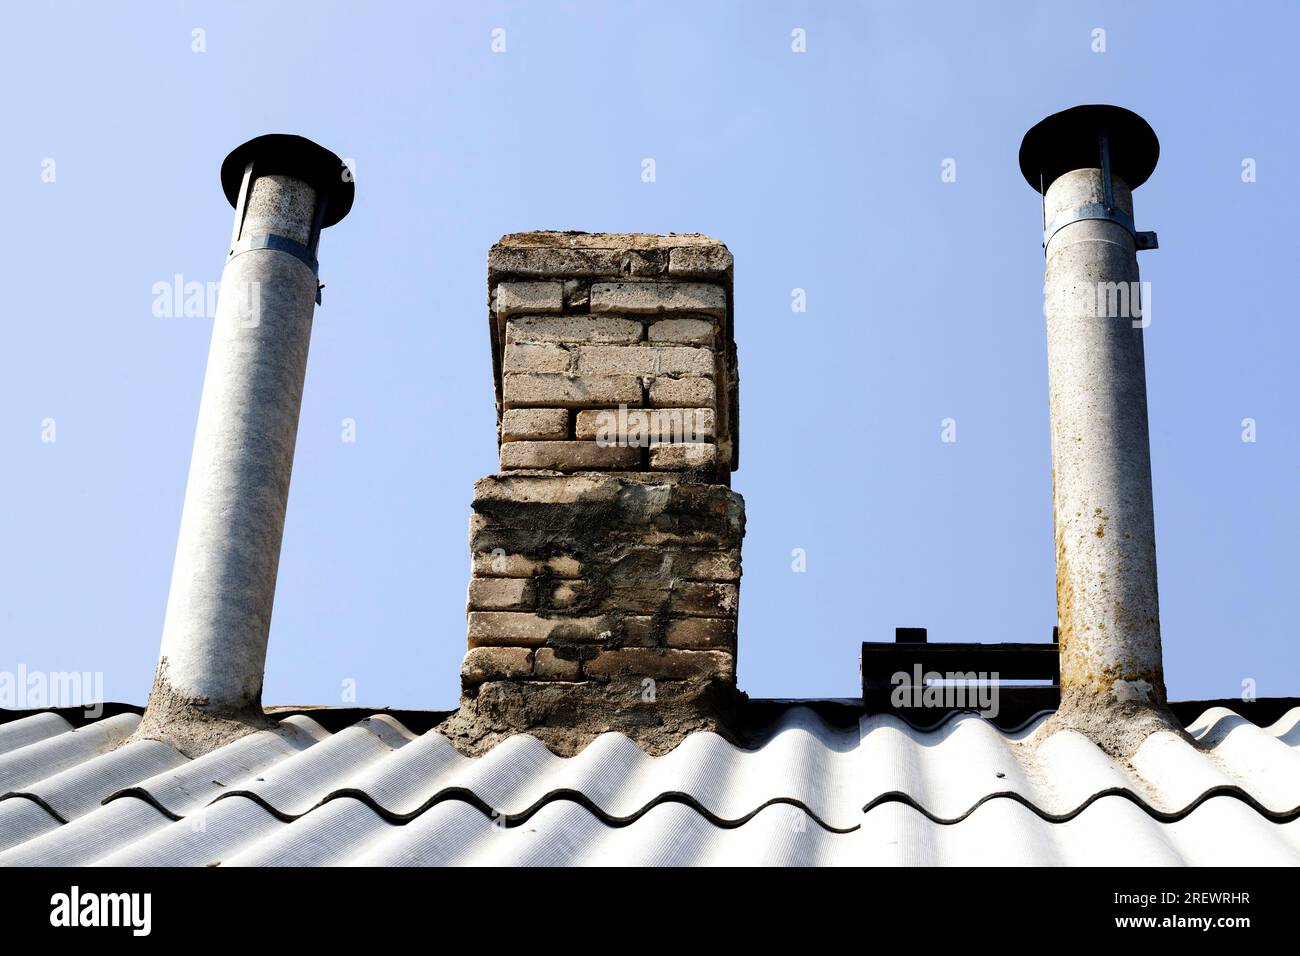 the upper part of the roof with slate and pipes made of bricks and metal pipes for heating the house with firewood and coal, against the blue sky chim Stock Photo